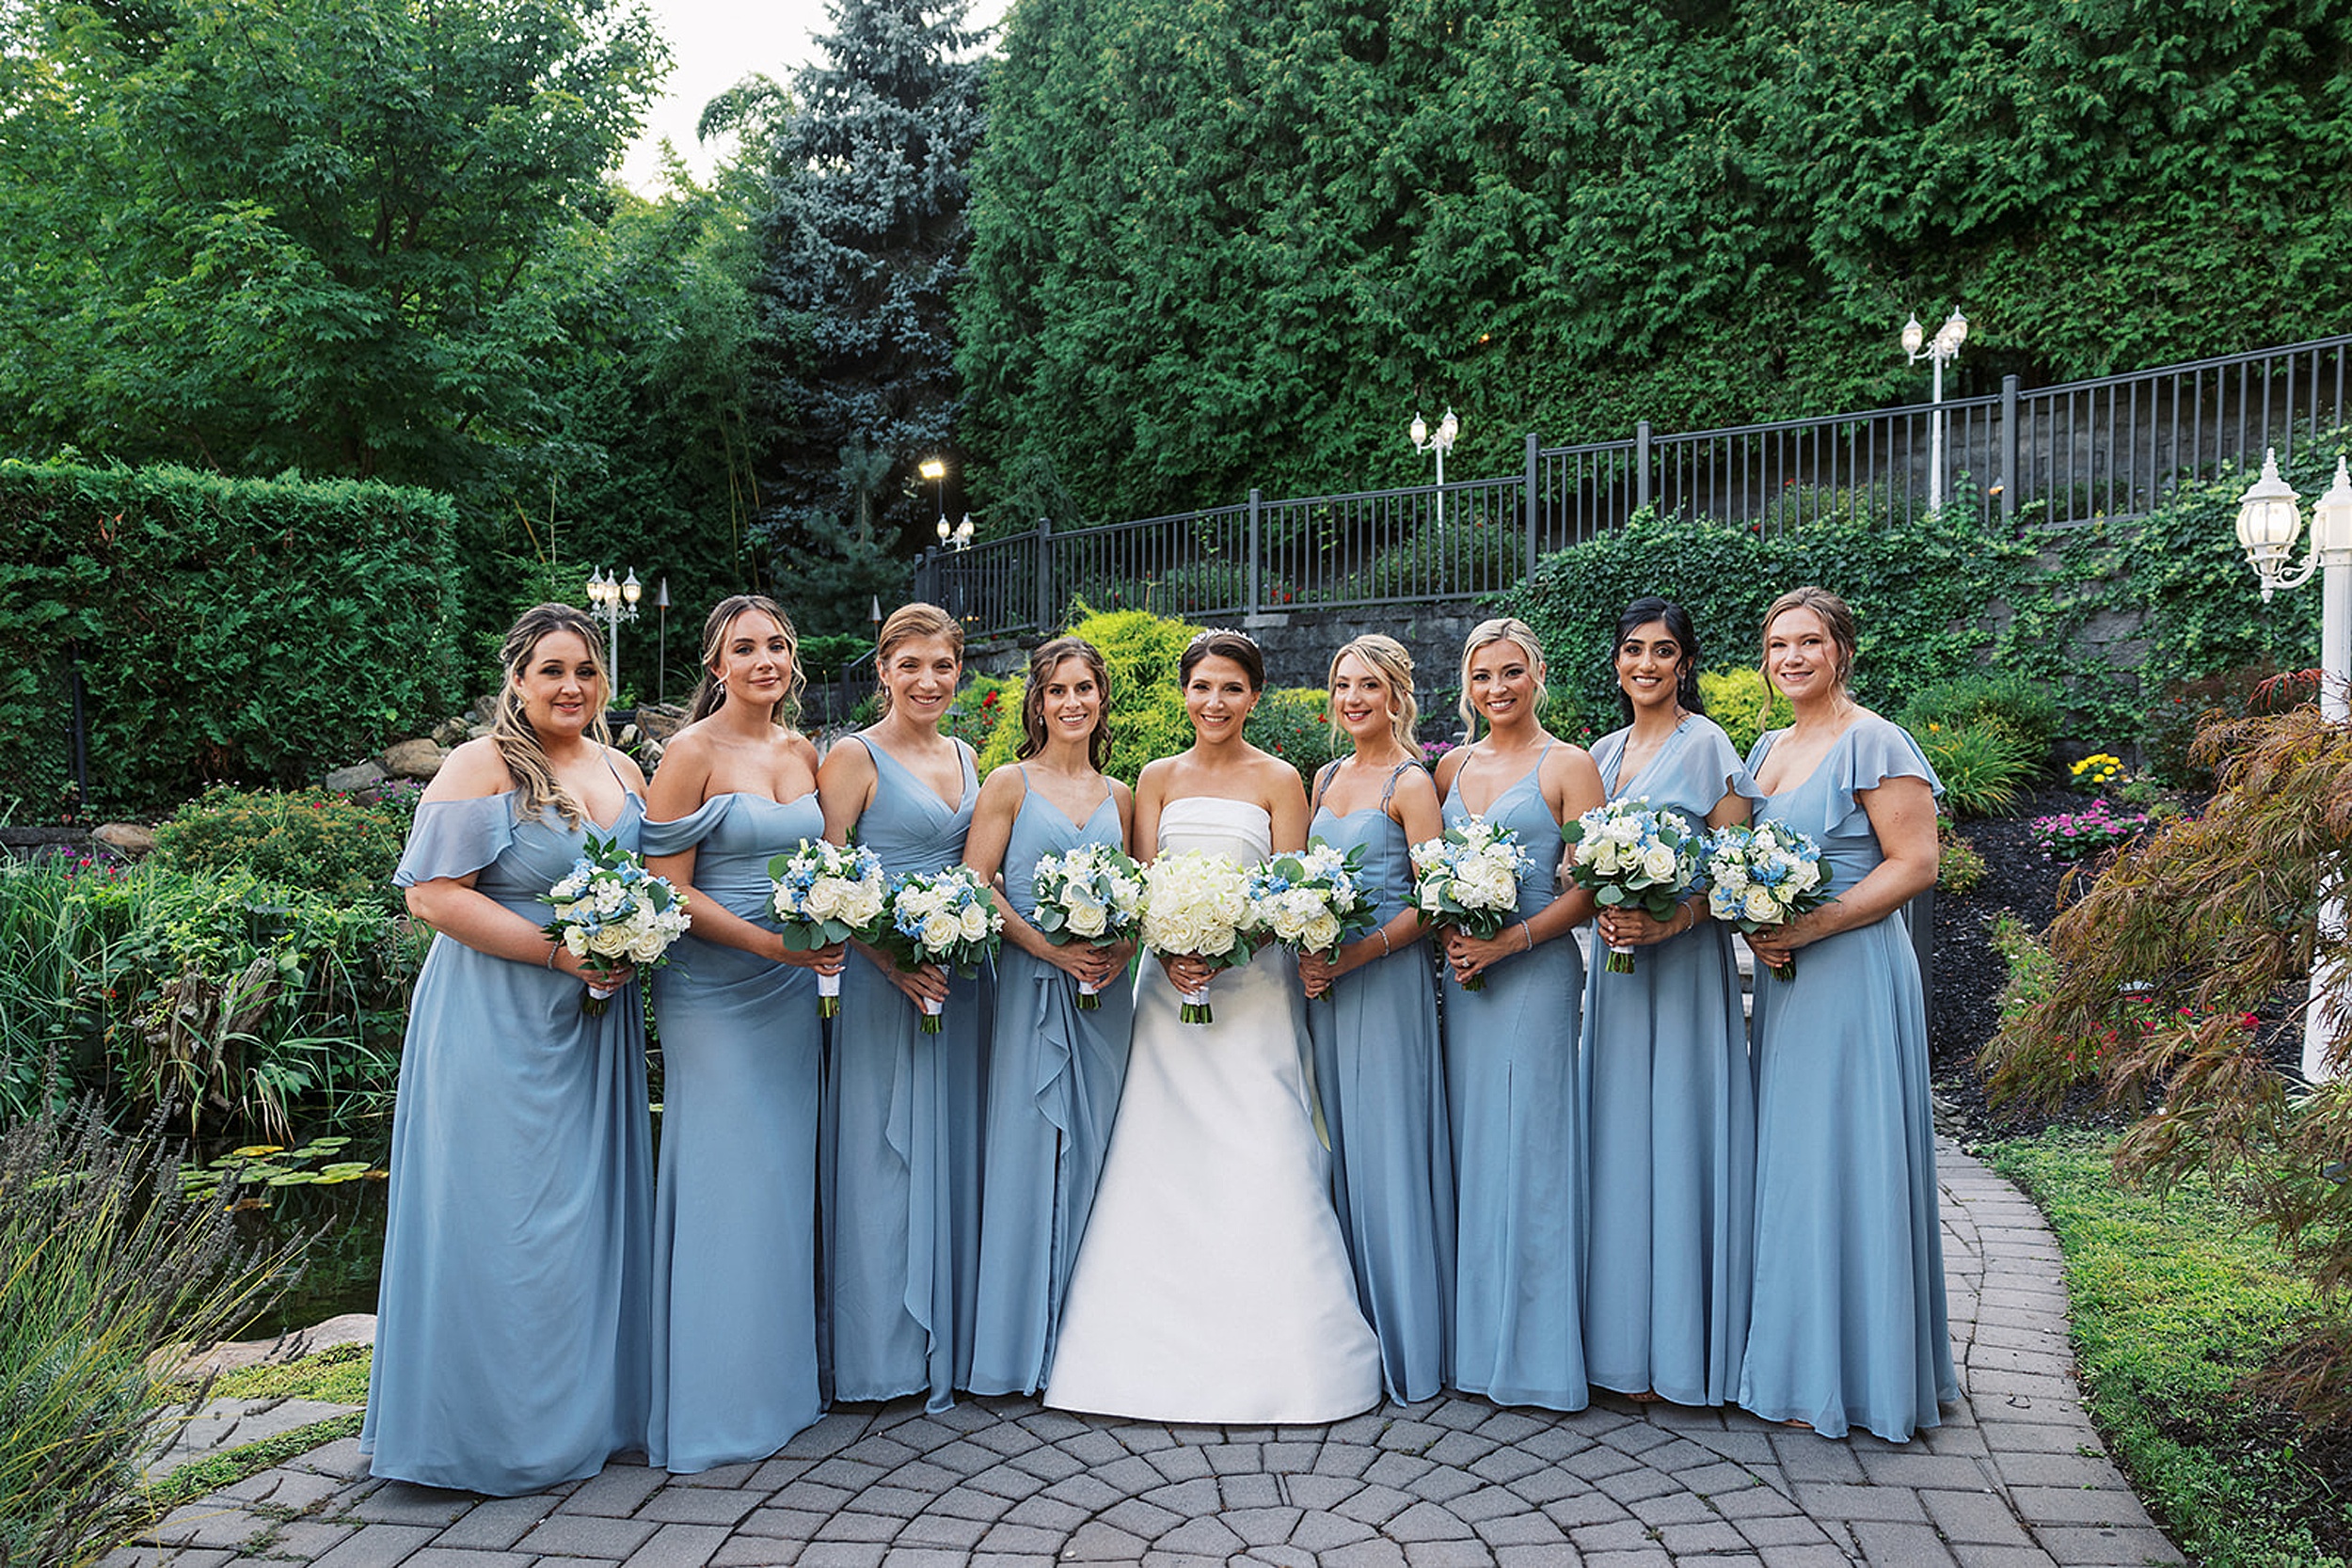 A bride stands in a garden by a pond with her bridal party wearing blue dresses and holding white rose bouquets at a valley regency wedding